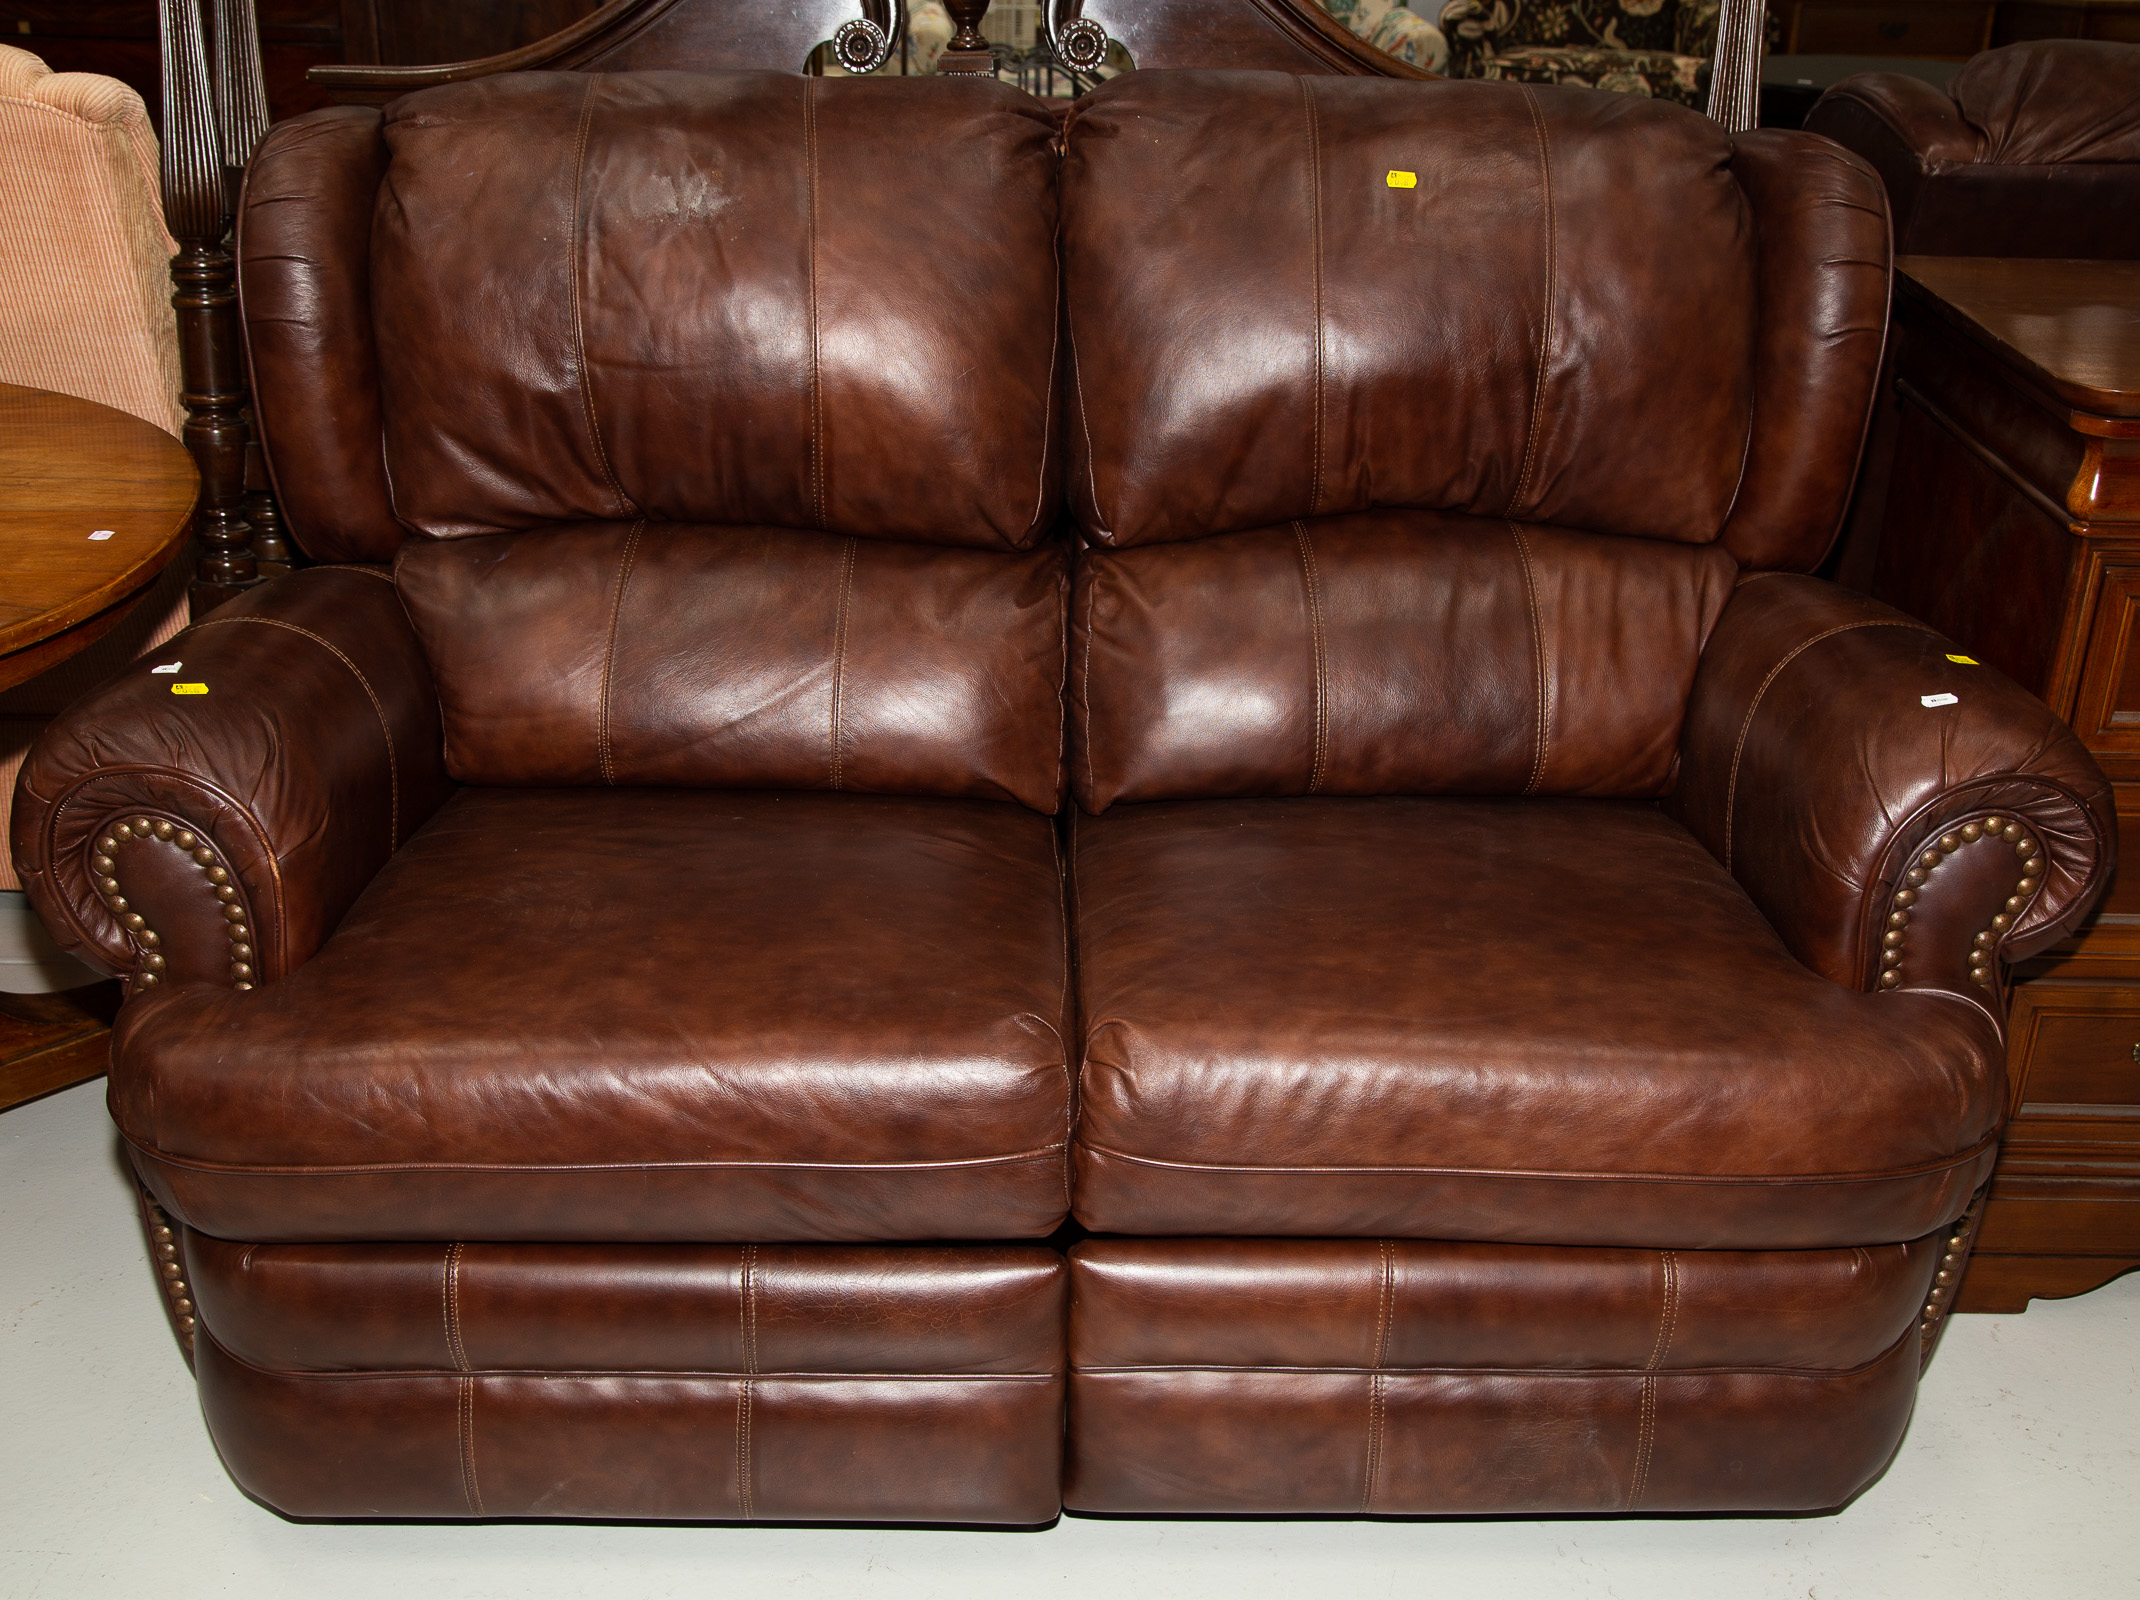 MODERN LEATHER TWO-SEAT RECLINER